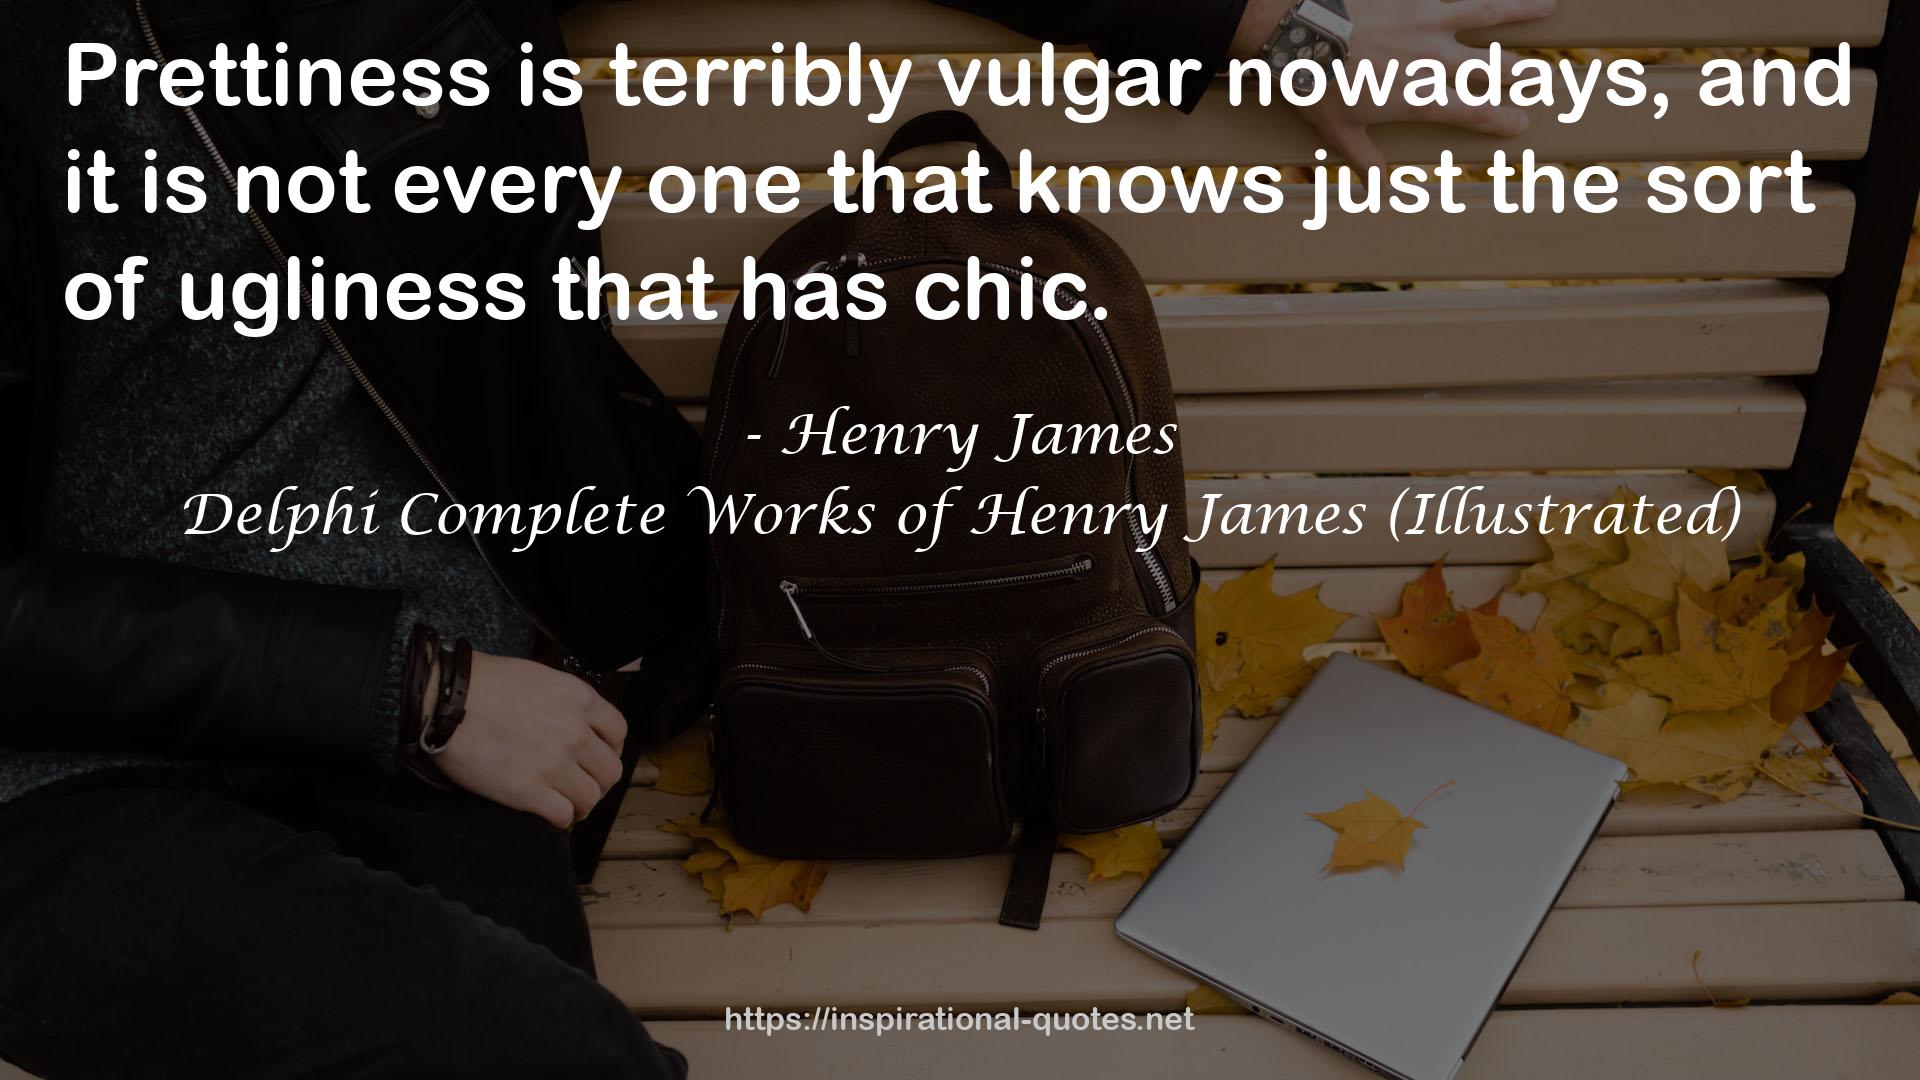 Delphi Complete Works of Henry James (Illustrated) QUOTES